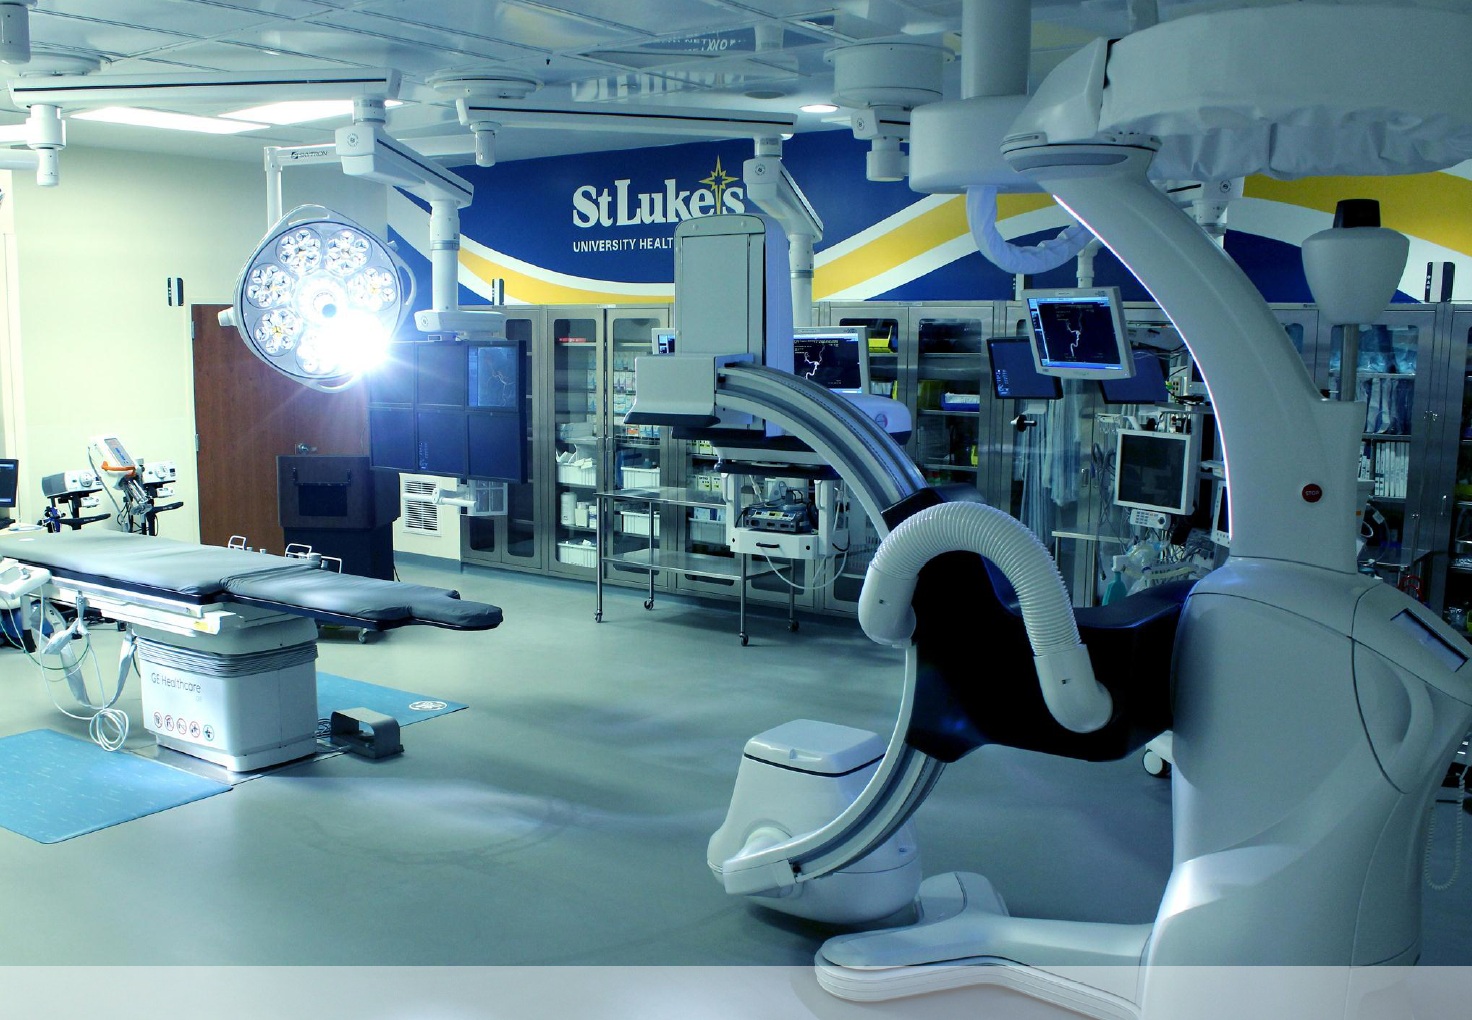 Hybrid-OR-Operating-Room-GE-Discovery-IGS-730-Skytron-LED-Surgical-Lights-Equipment-Booms-PA-23.jpg